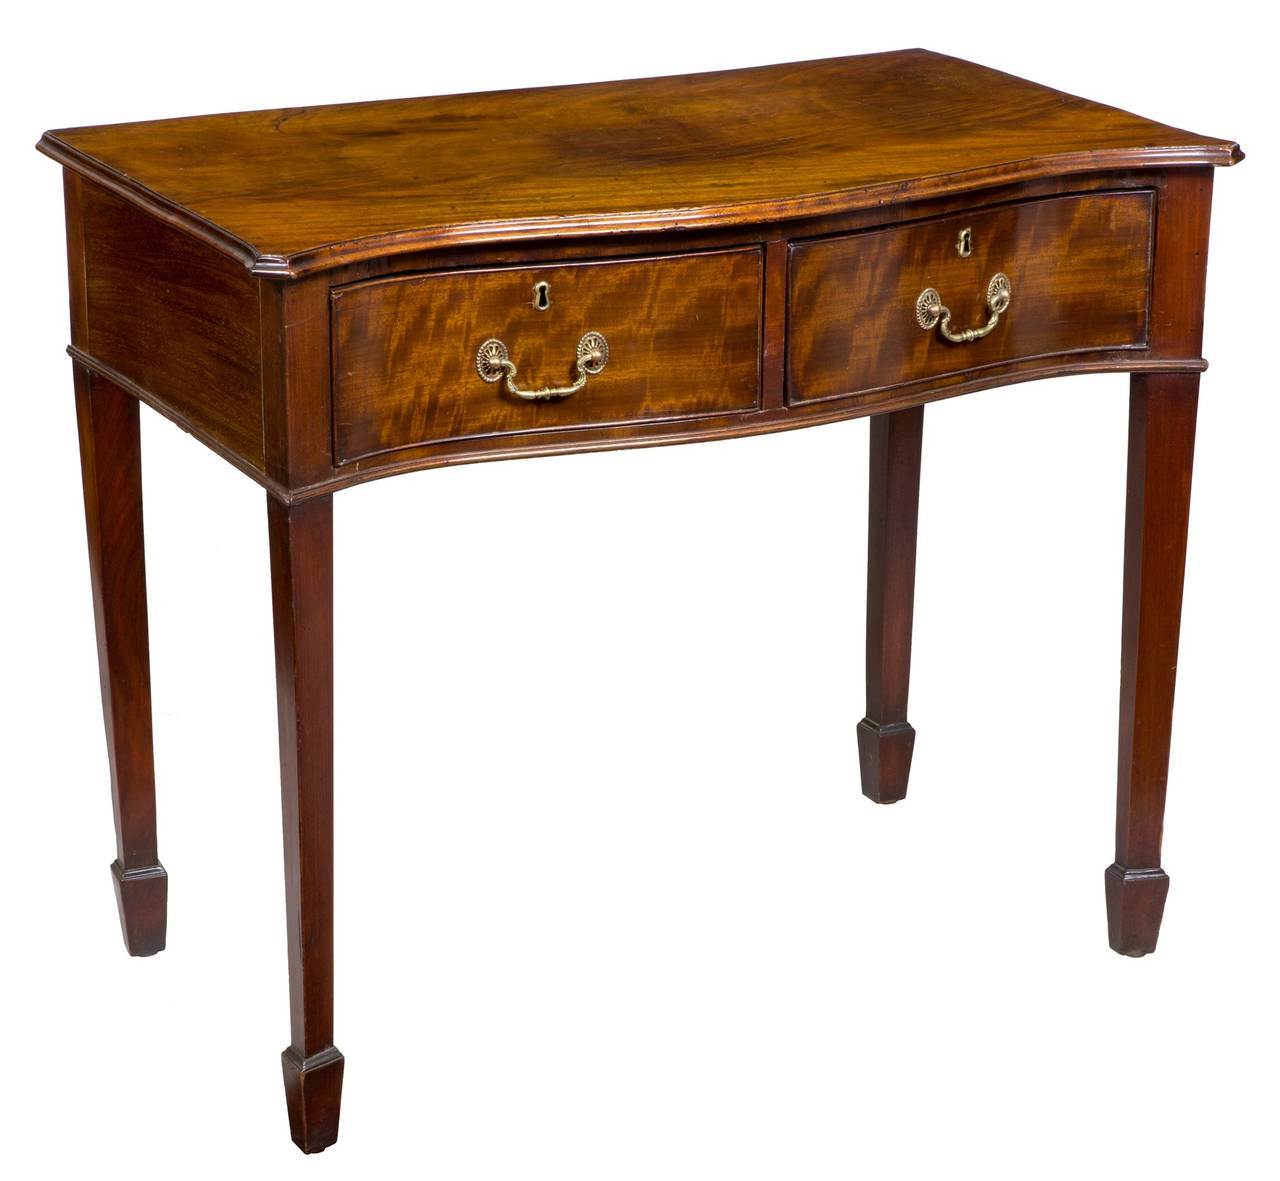 This is a particularly useful small-scale server with an exceptionally beautiful solid one-board mahogany top. Note the figure on the top board; it was obviously selected for dramatic effect. The front is serpentine in shape and has tapered legs